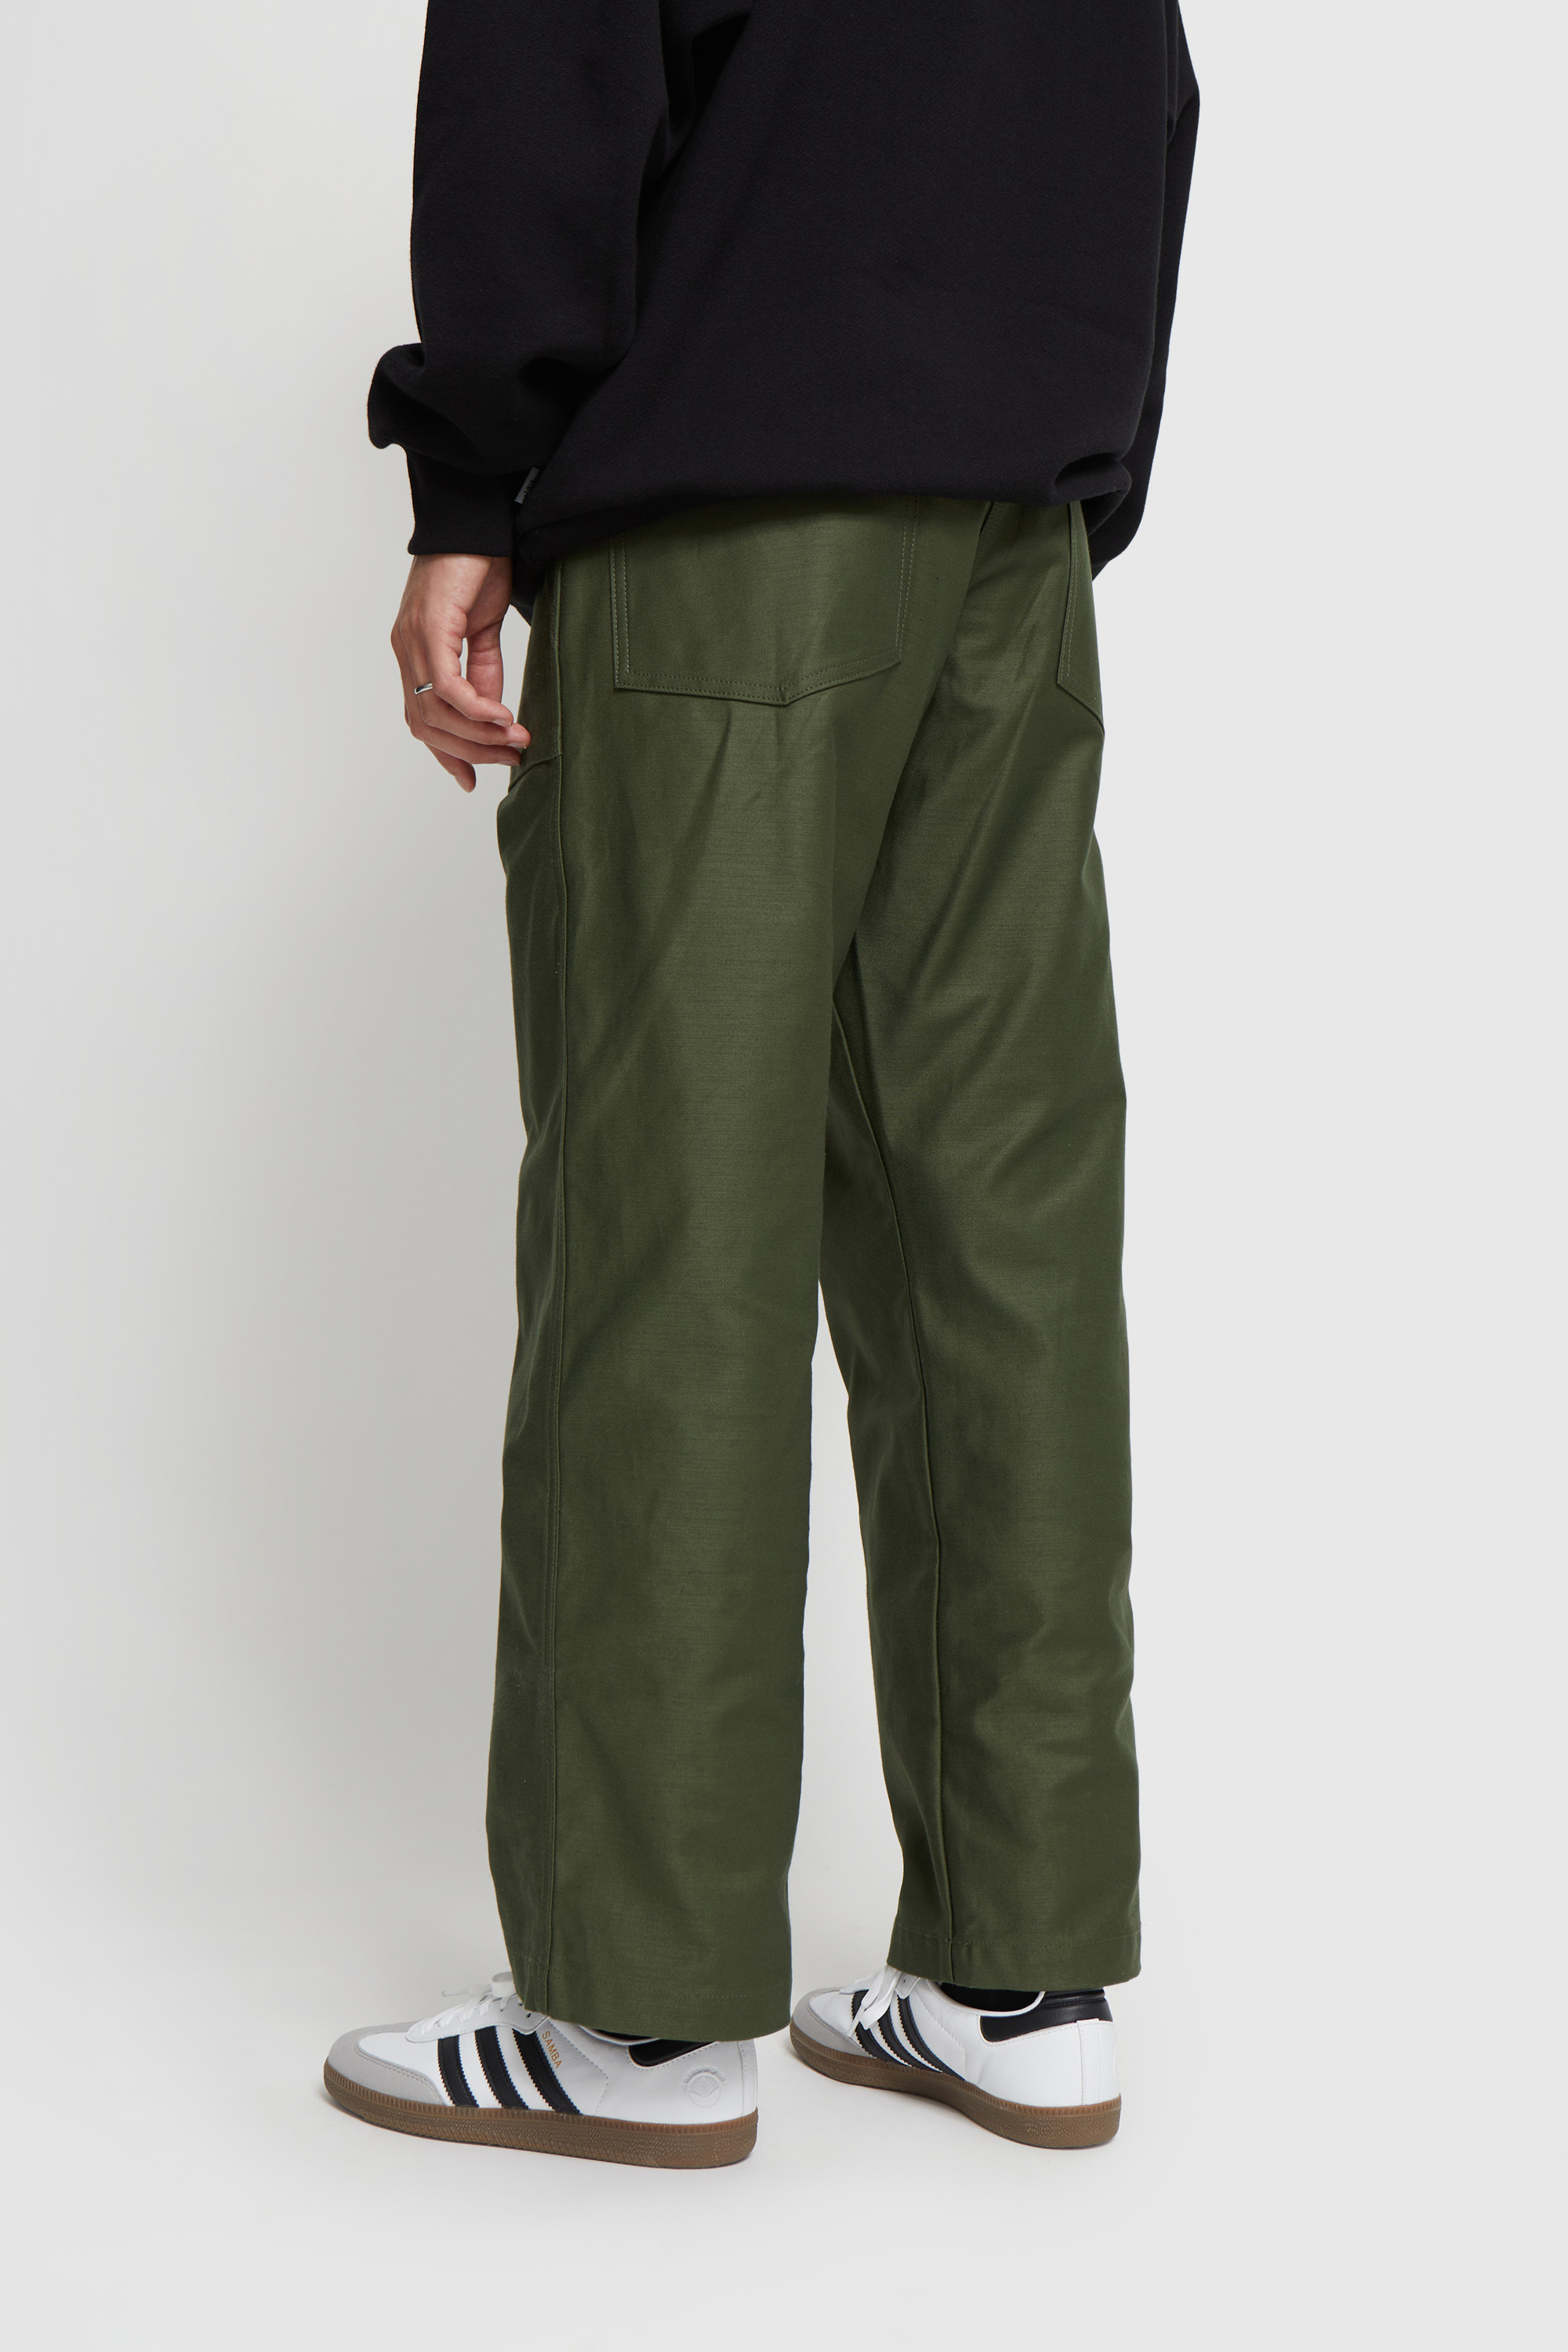 OLIVEDWTAPS 192WVDT-PTM02 WMILL-TROUSERS サイズM